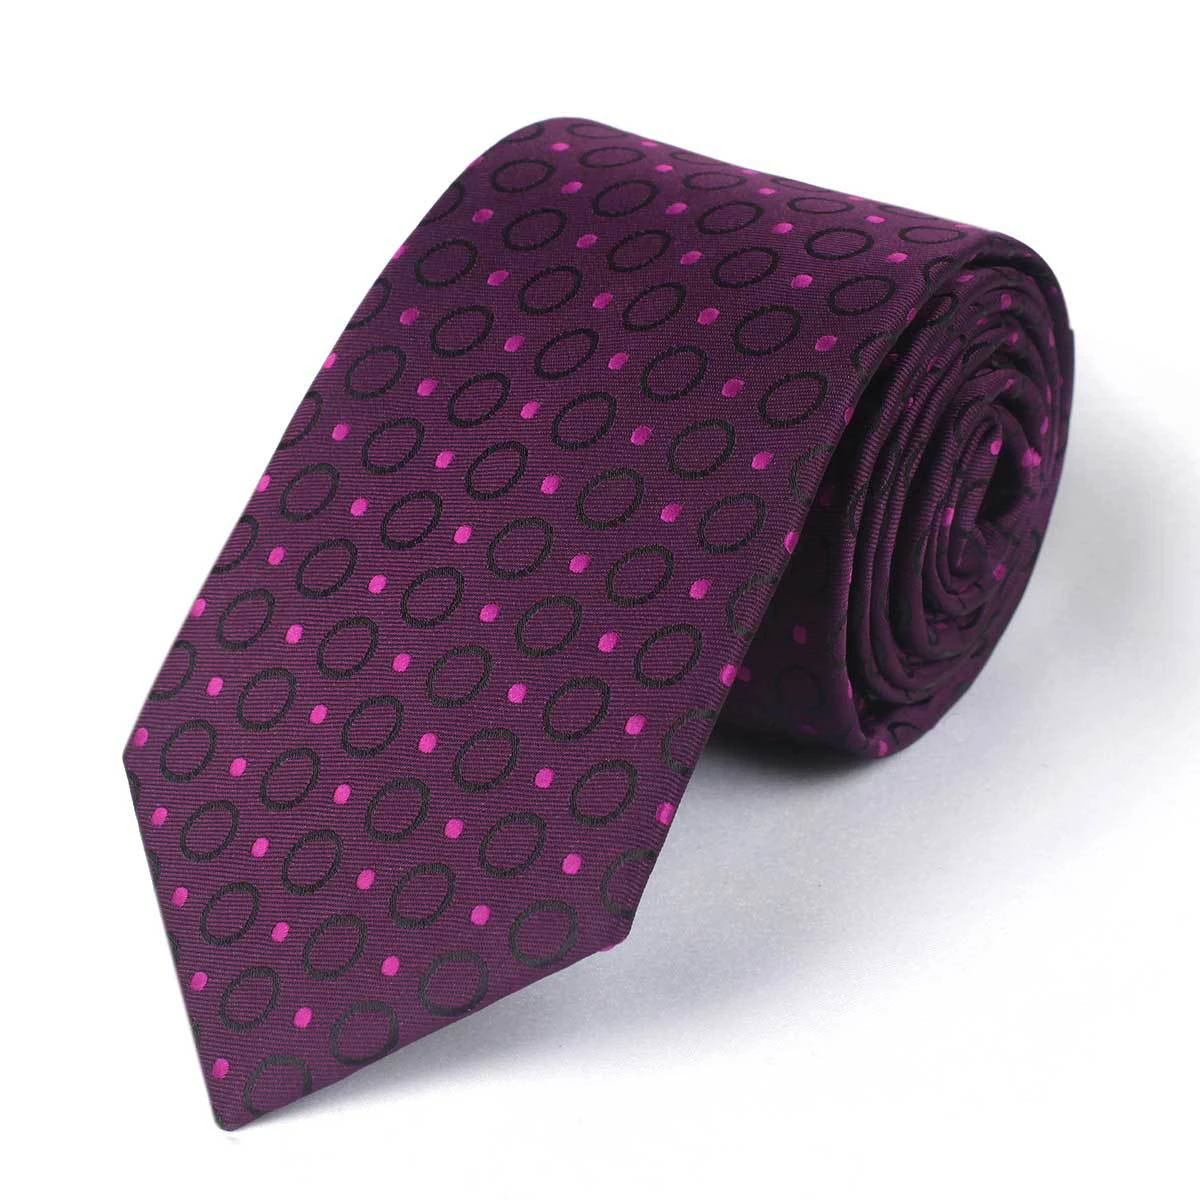 New type 7cm business suit hand-made polyester silk tie